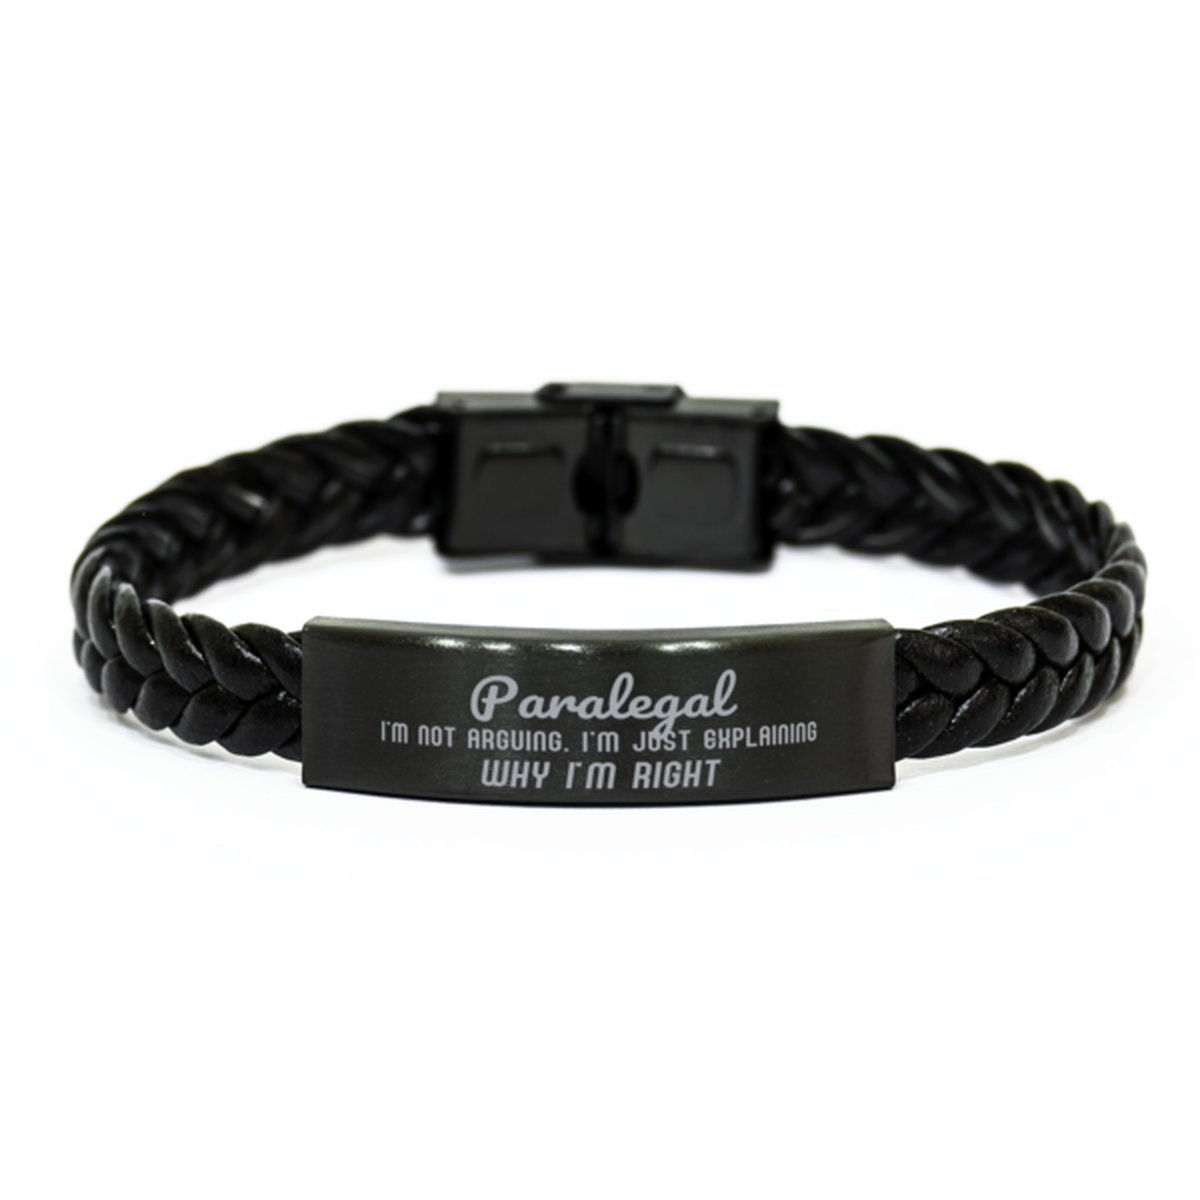 Paralegal I'm not Arguing. I'm Just Explaining Why I'm RIGHT Braided Leather Bracelet, Graduation Birthday Christmas Paralegal Gifts For Paralegal Funny Saying Quote Present for Men Women Coworker